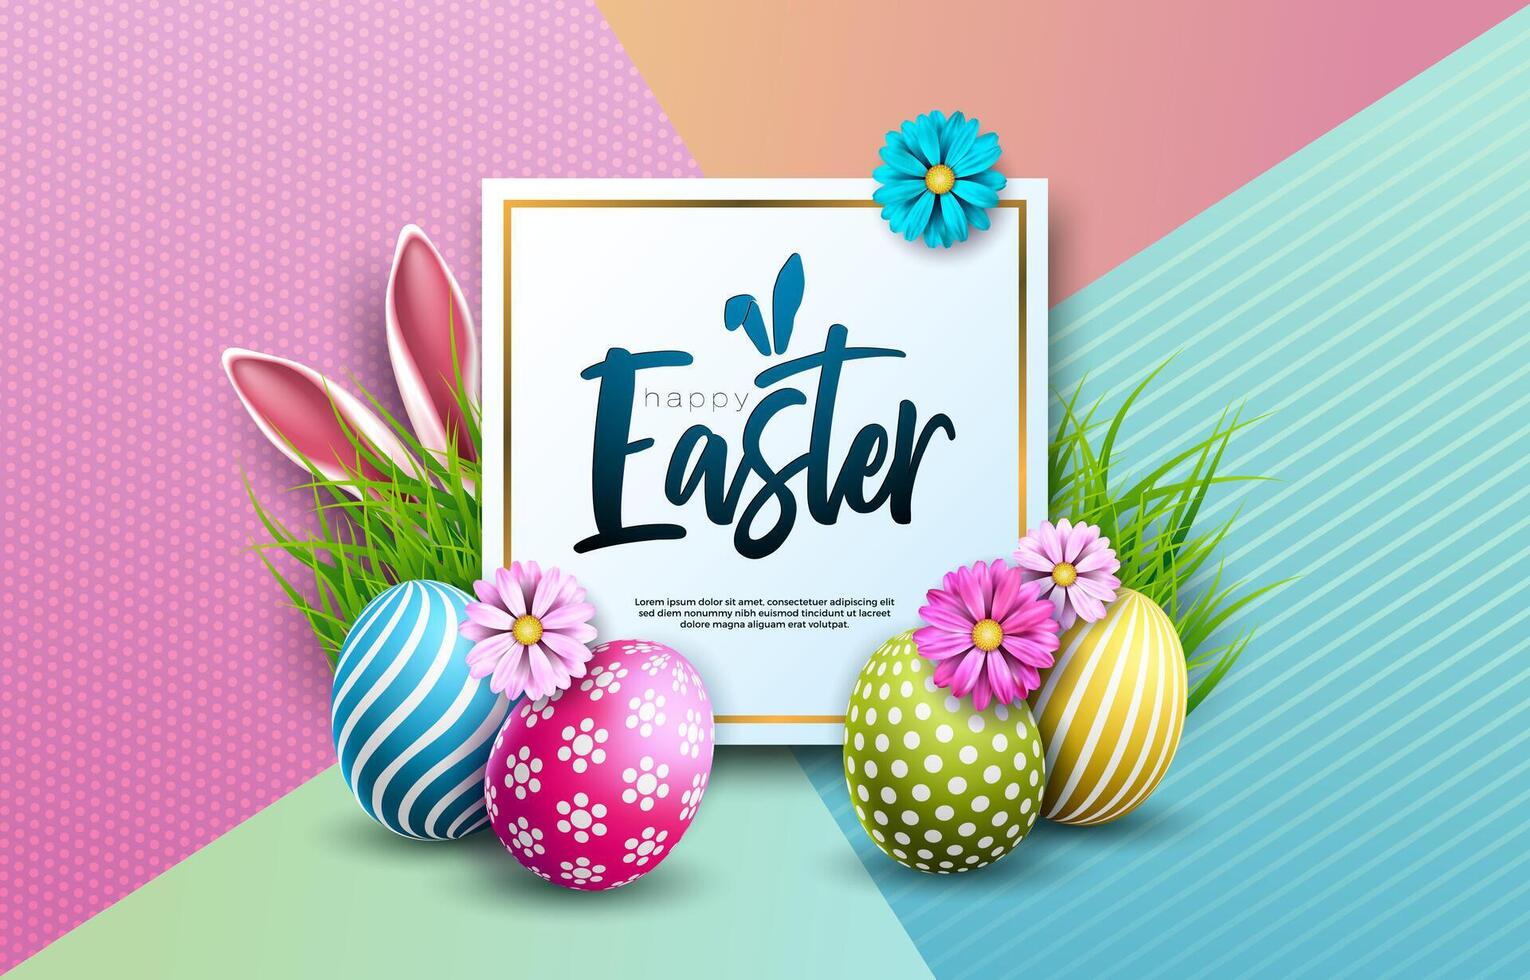 Happy Easter Holiday Design with Painted Egg, Flower and Rabbit Ears on Abstract Colorful Background. International Religious Vector Celebration Illustration with Typography for Greeting Card, Party